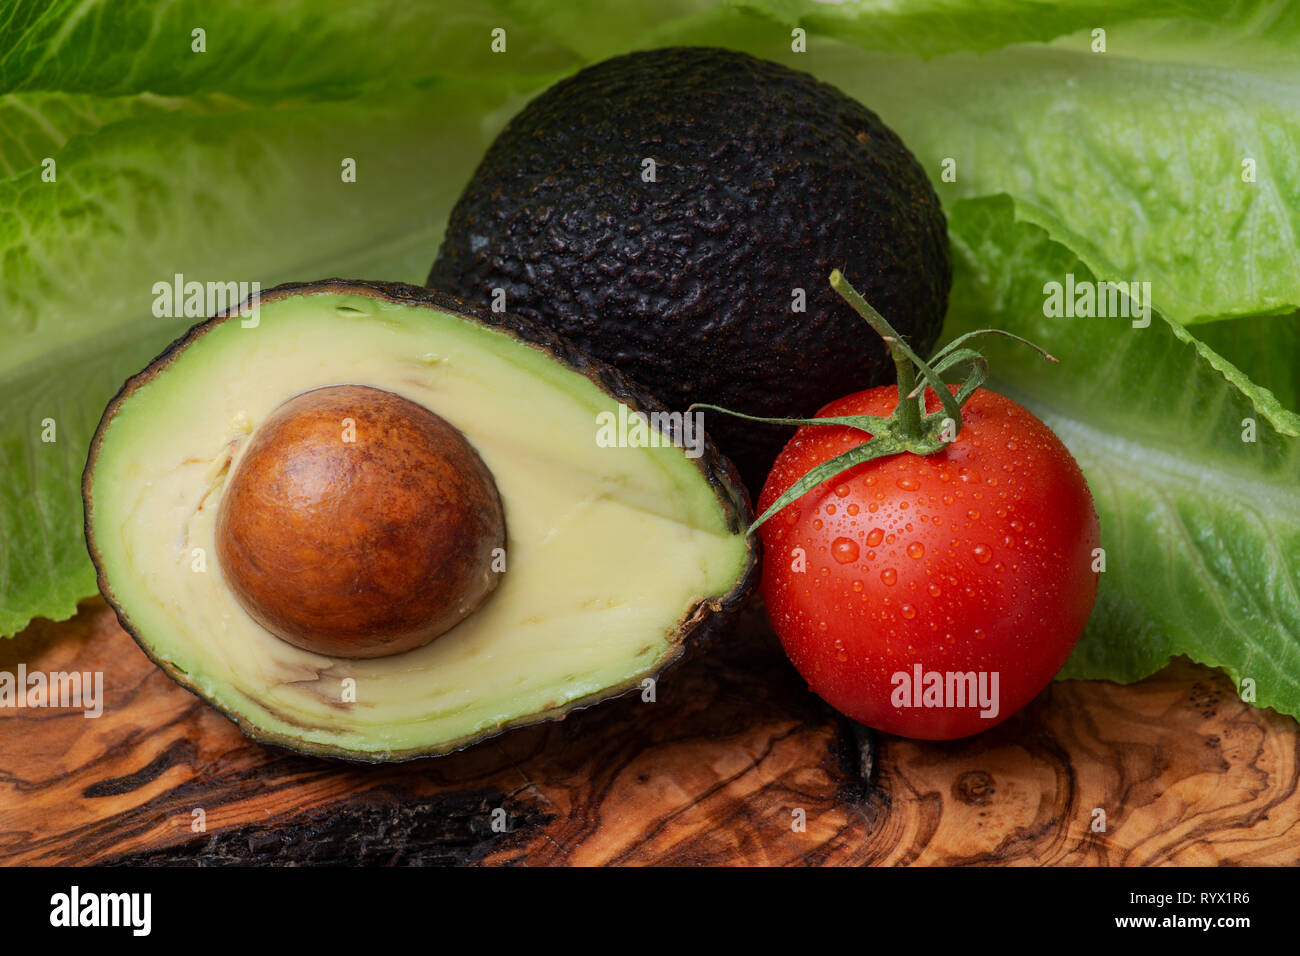 Fresh Organic Avocado Cut In Half And Organic Red Tomatoes On The